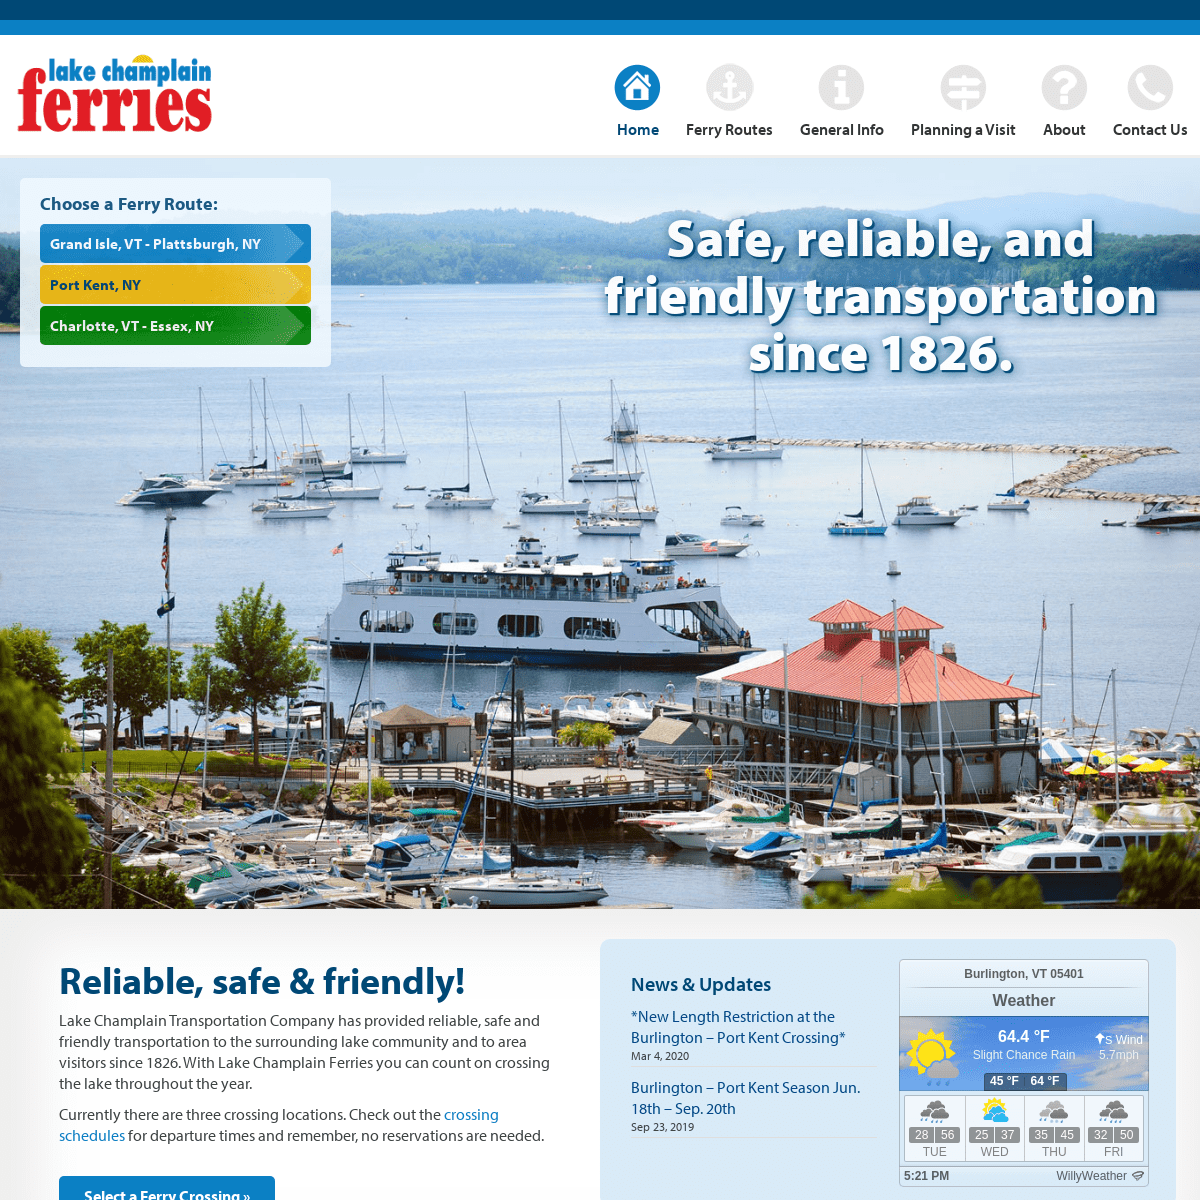 A complete backup of ferries.com